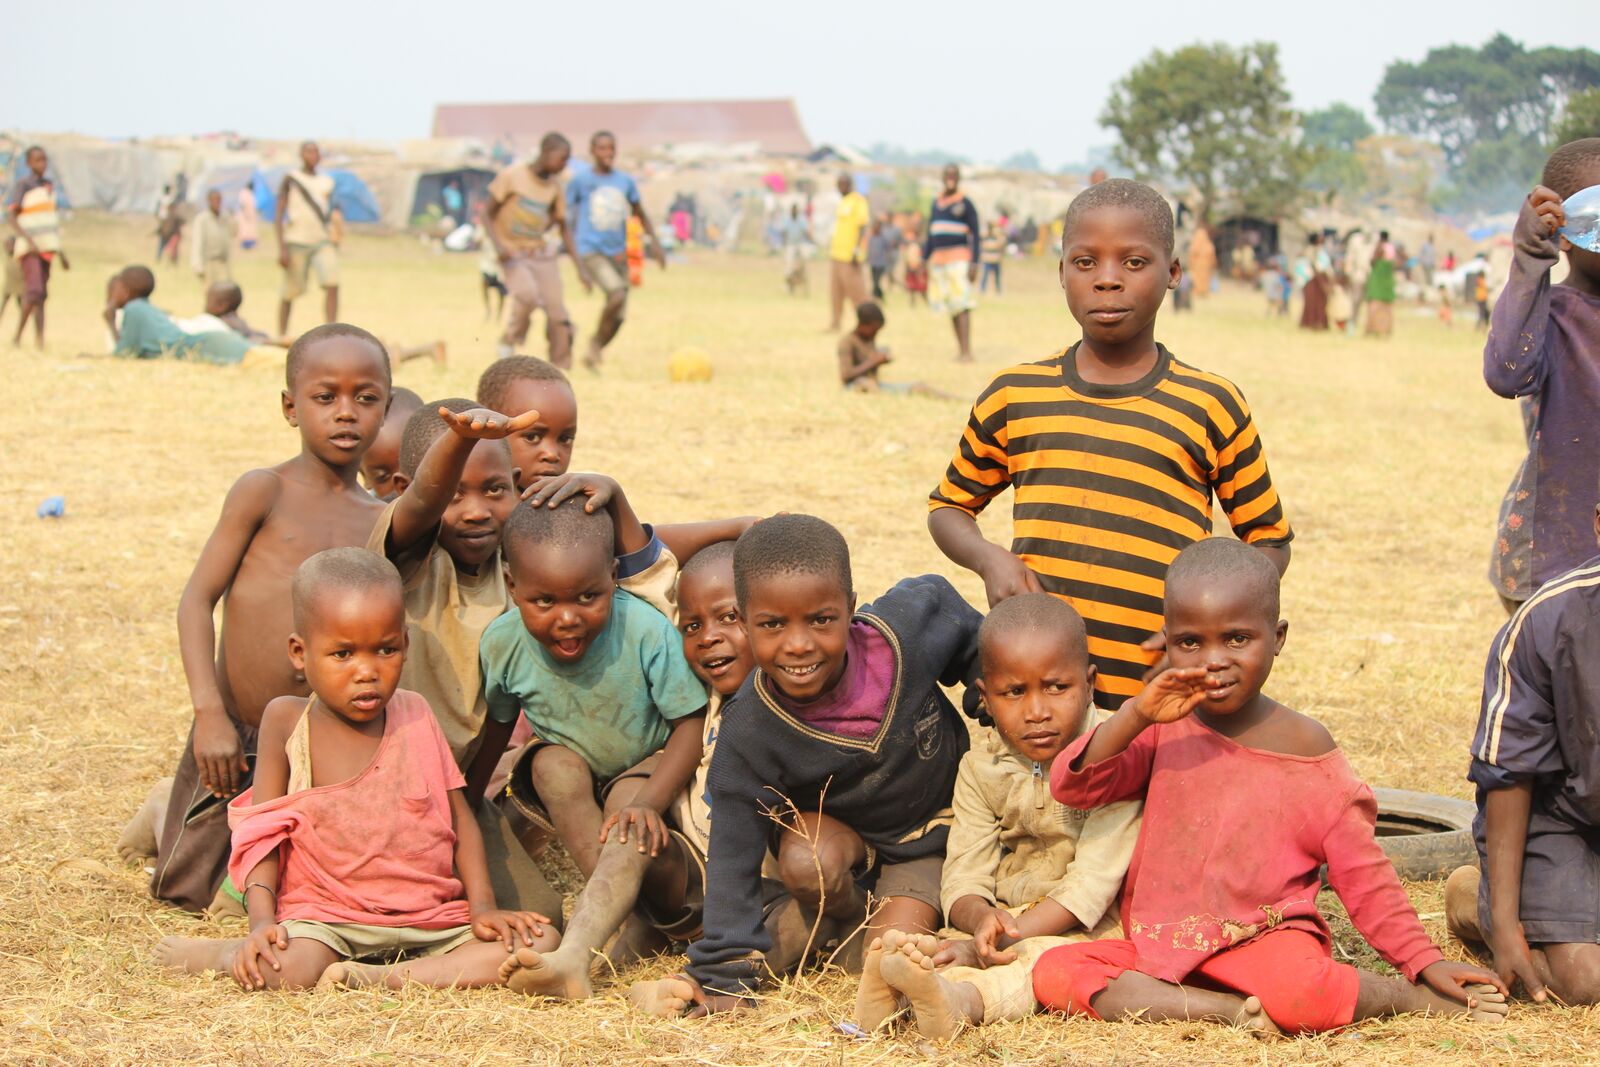 Children gather for a photo in a community where donations support solar panels